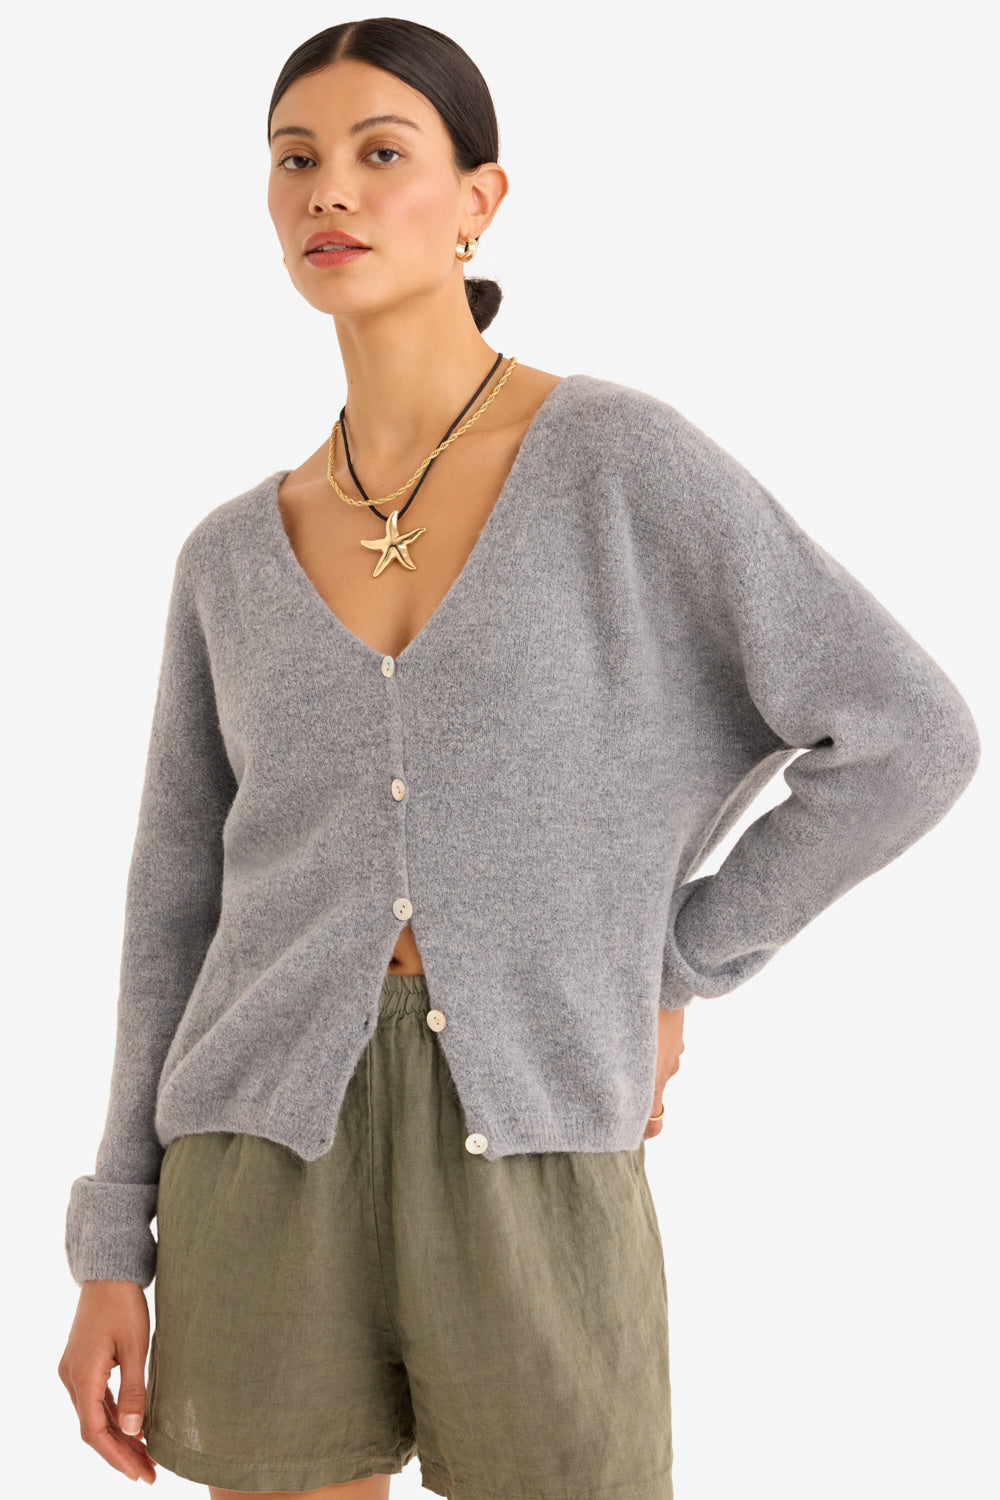 The Colette Cardigan